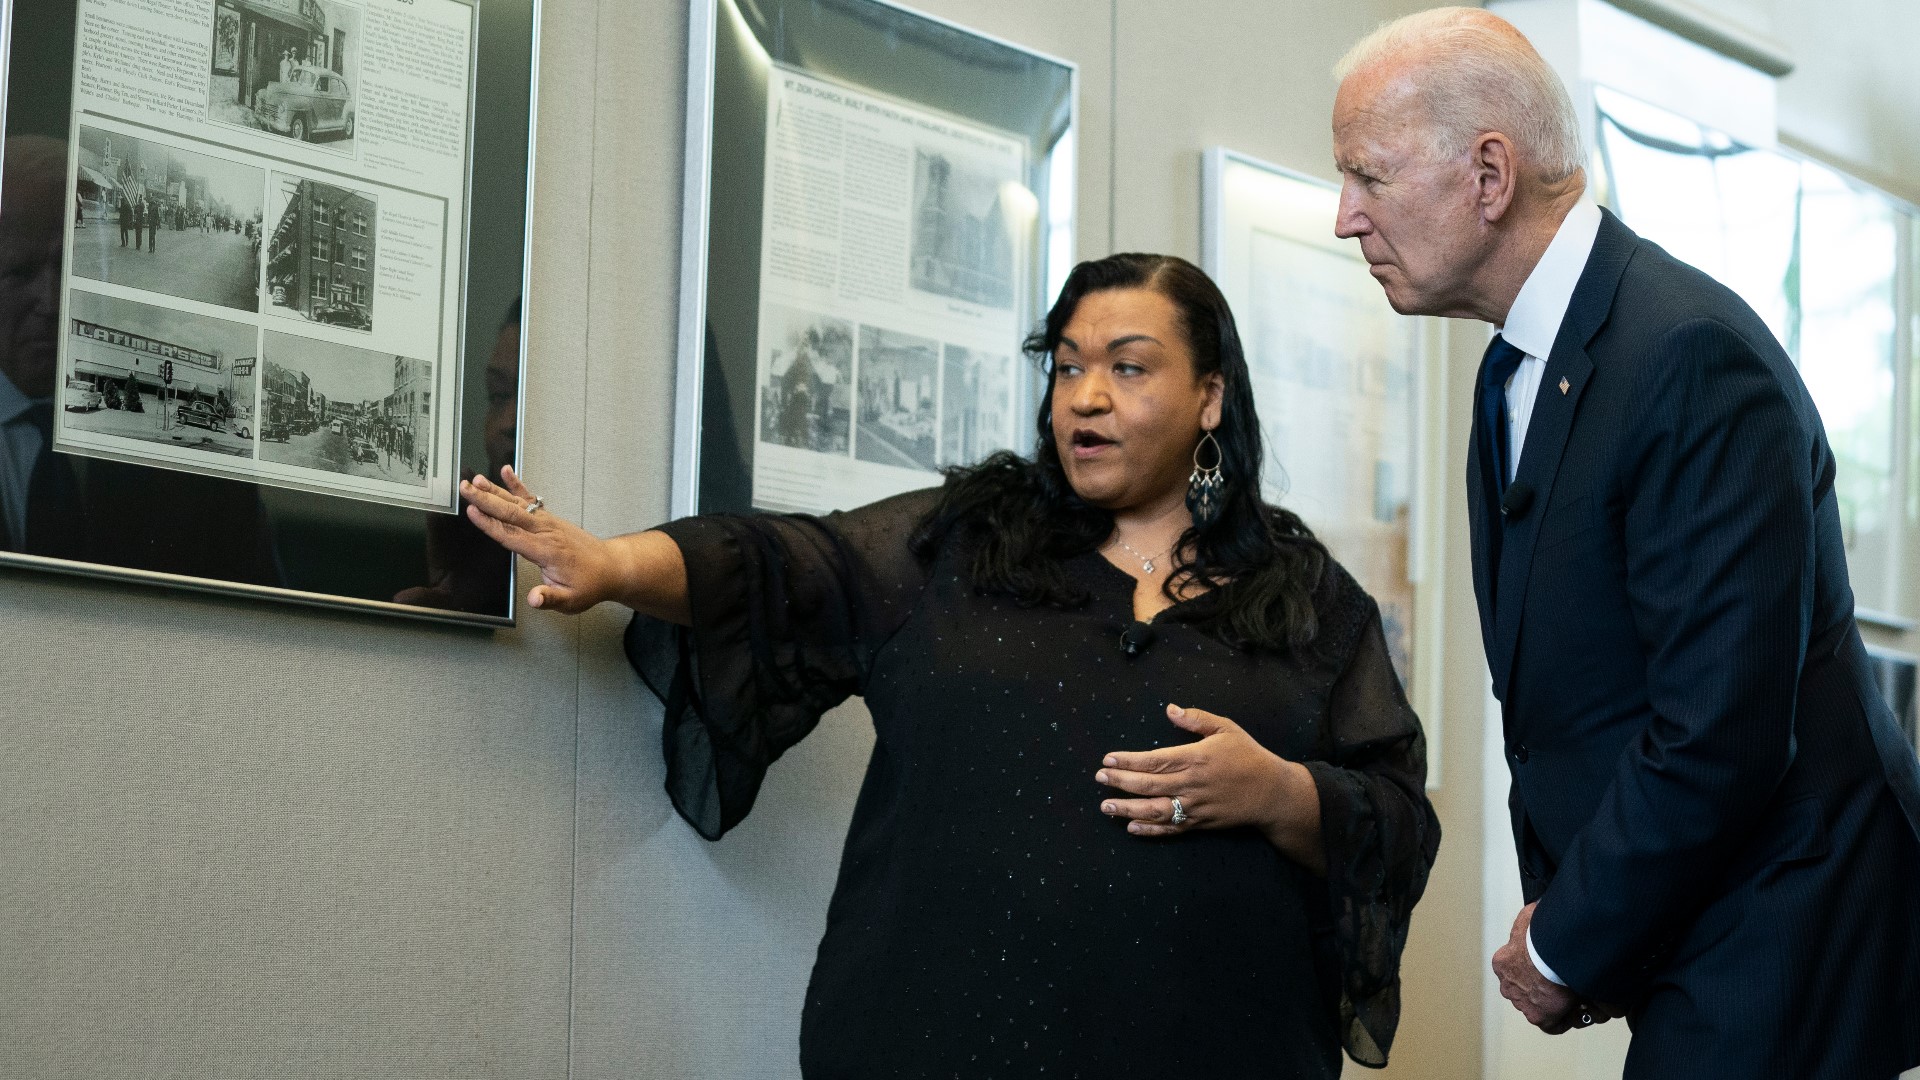 Biden spoke Tuesday of the hundreds of Black people killed by a white mob a century ago and was set to meet with survivors.